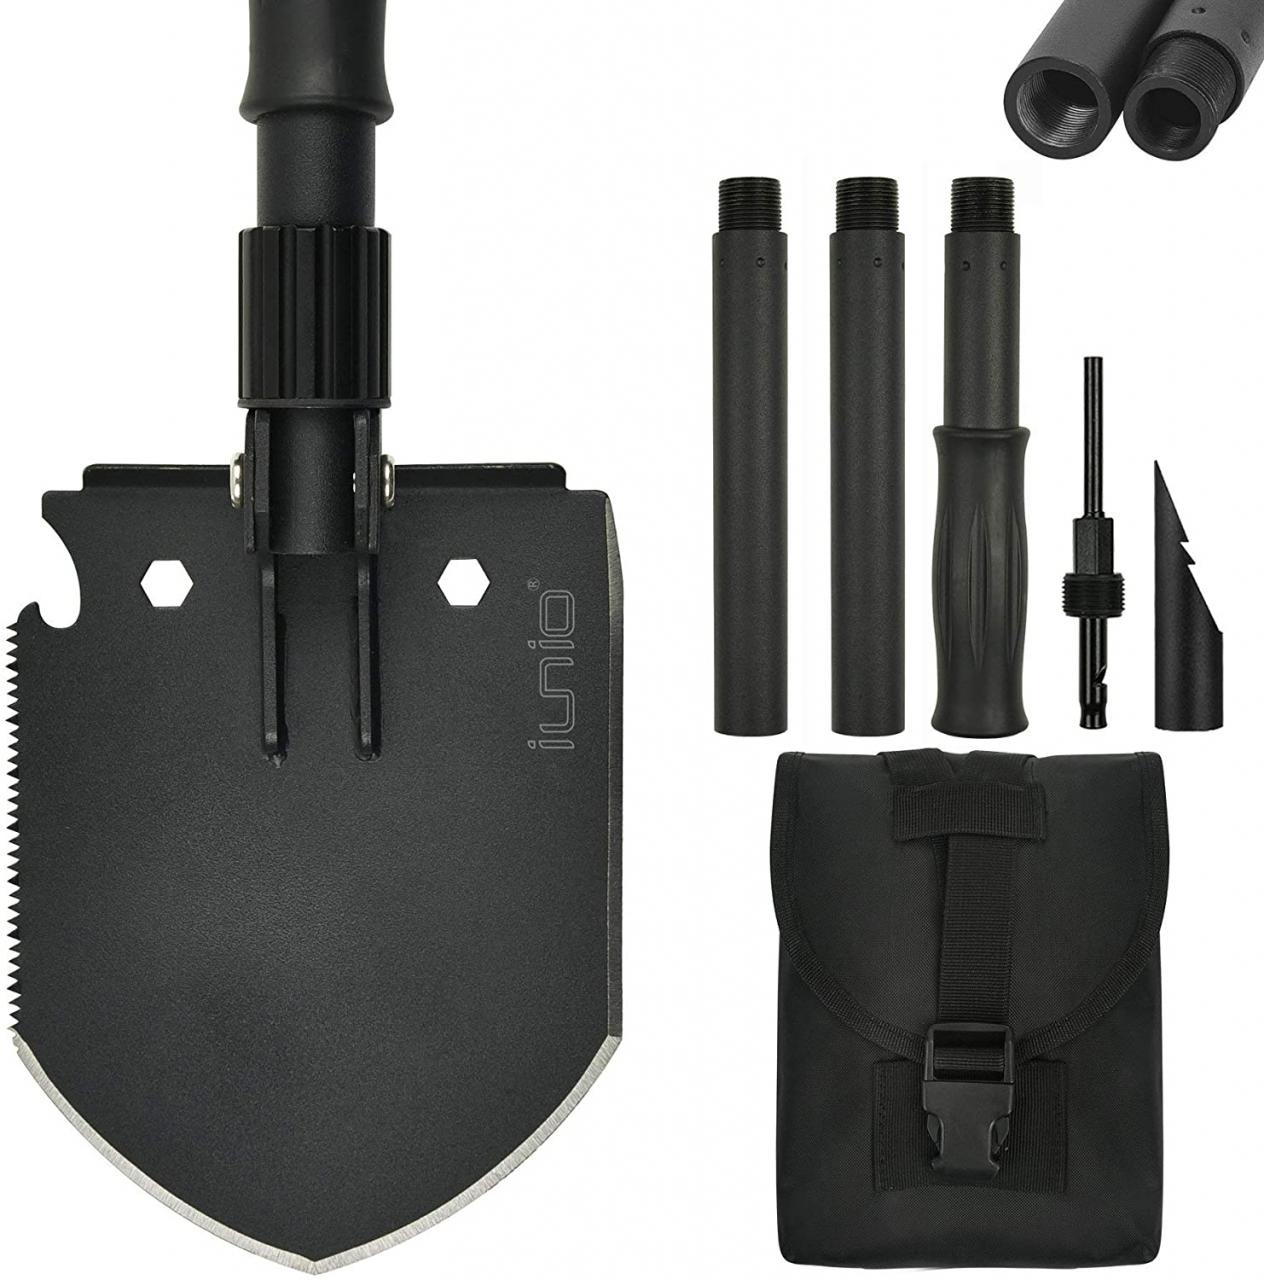 Buy iunio Folding Shovel Portable, Camping Shovel Multitool, Foldable  Entrenching Tool , Collapsible Spade, for Backpacking, Army,Trenching,  Hiking, Survival, Car Emergency Online in Turkey. B092S5TN9M